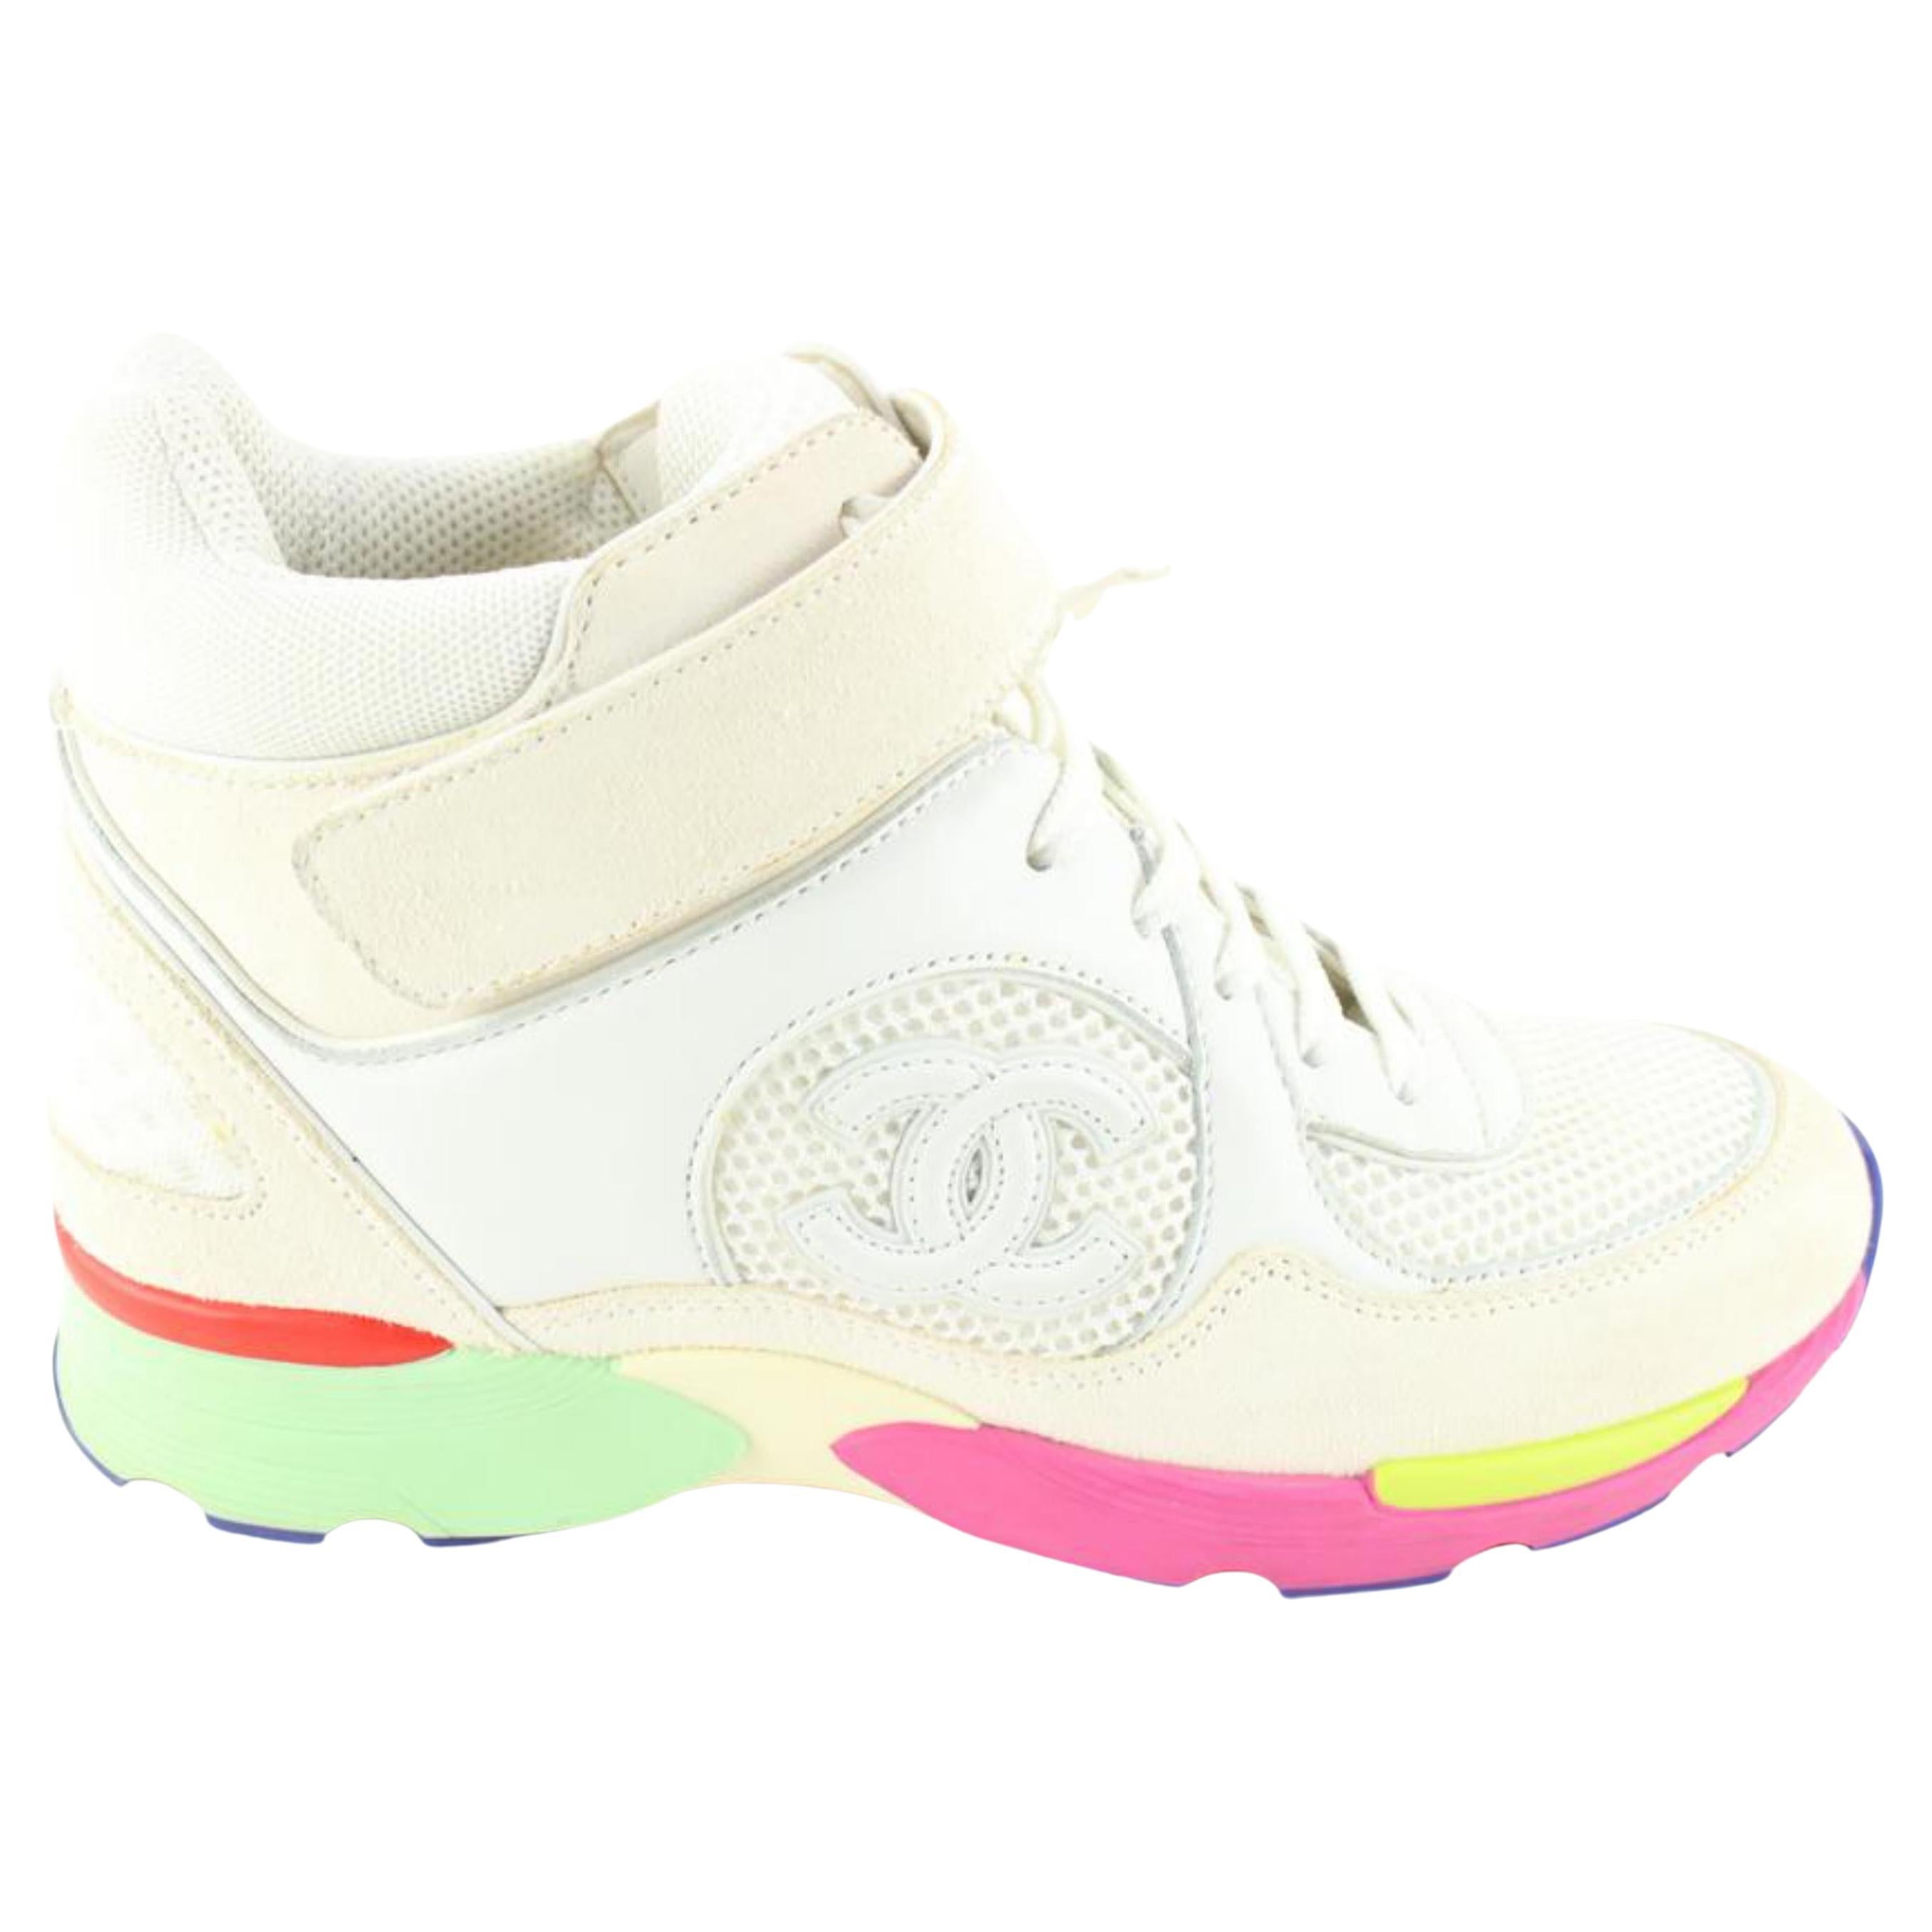 chanel sneakers